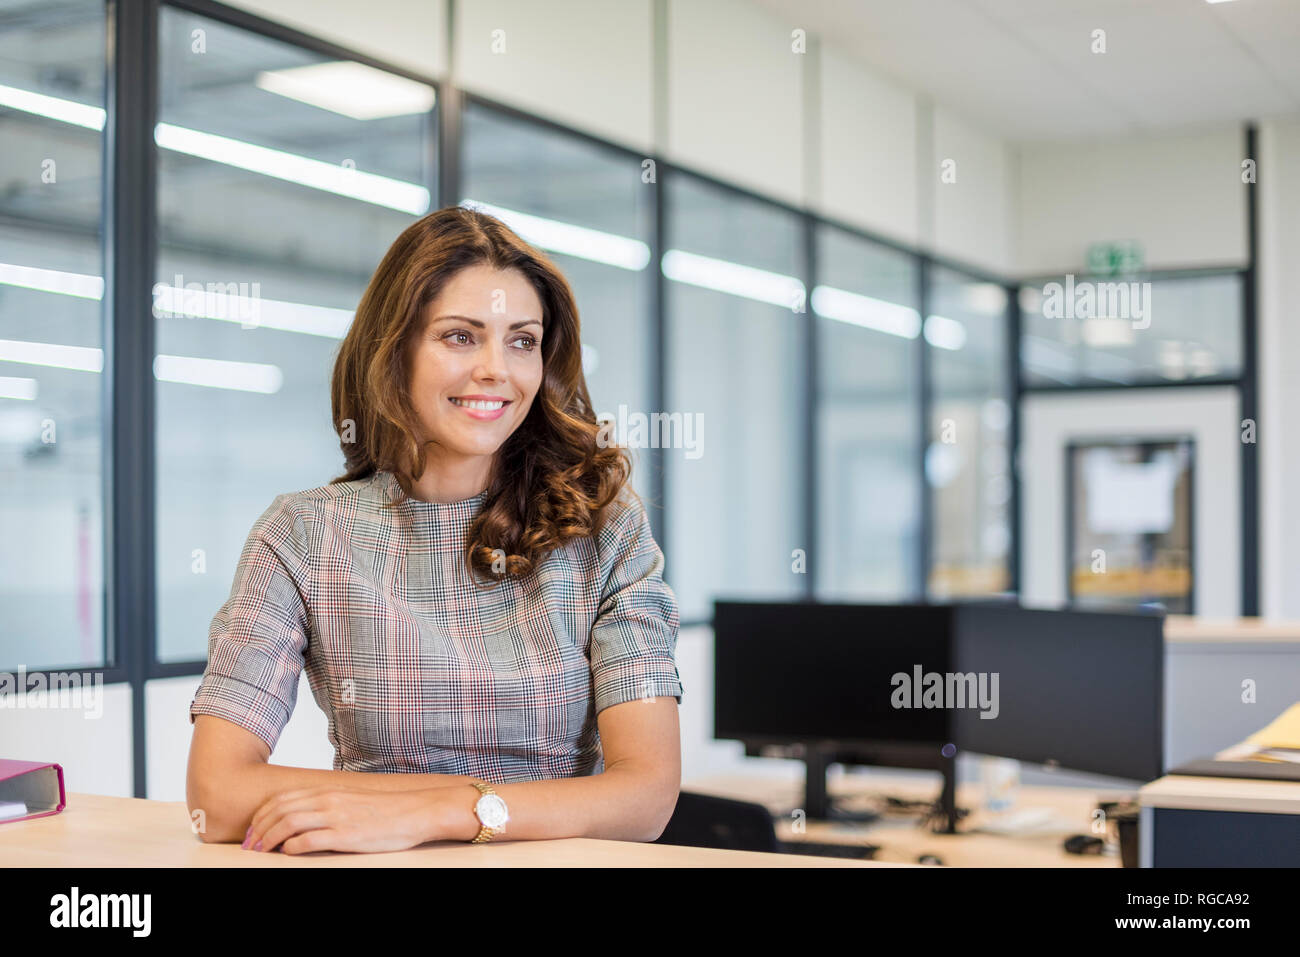 Smiling office worker sitting at desk Stock Photo